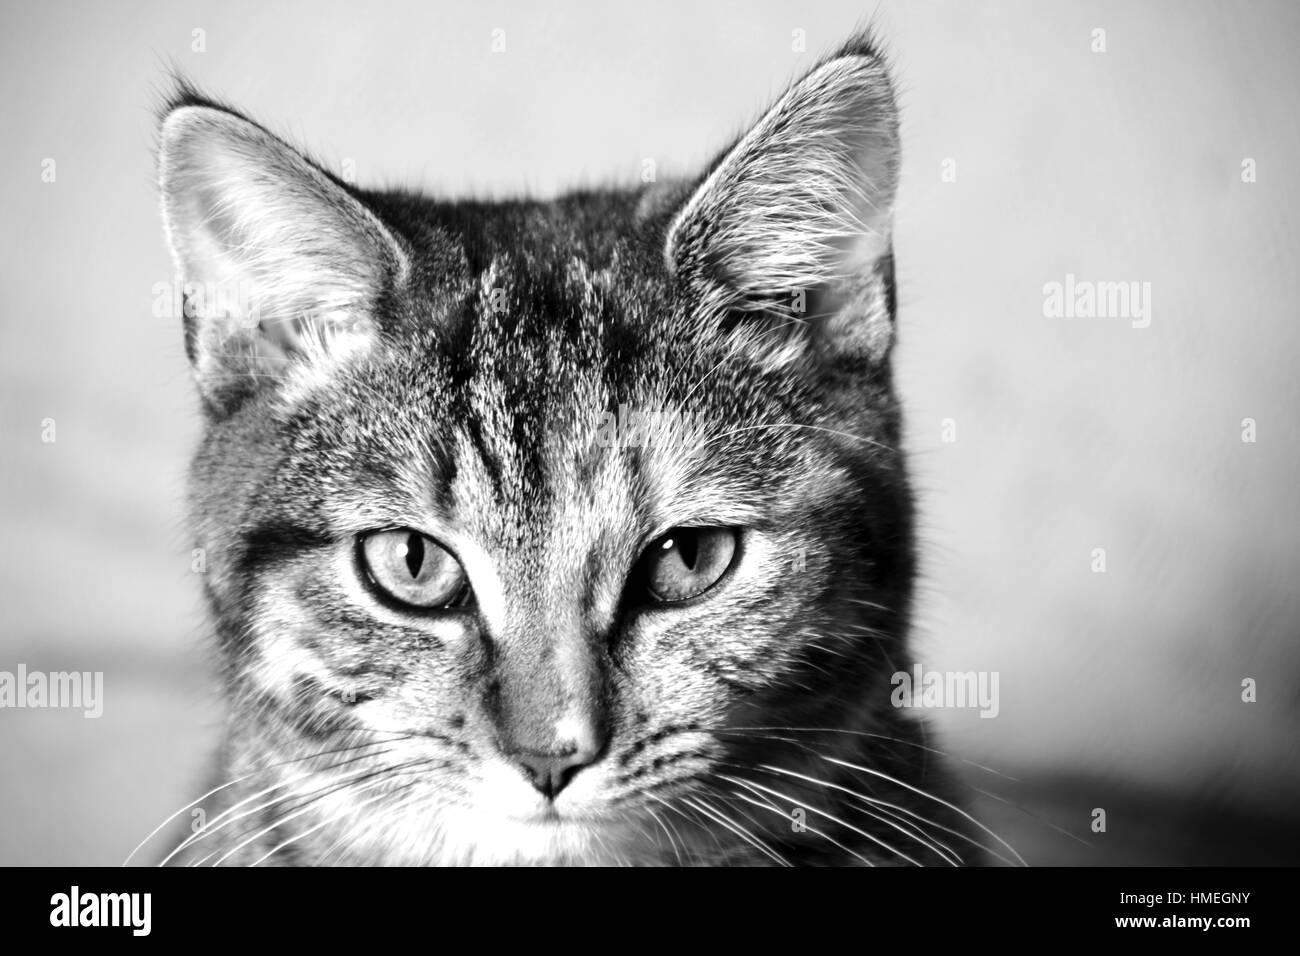 Black and white portrait of a cat with a blurred white background Stock Photo